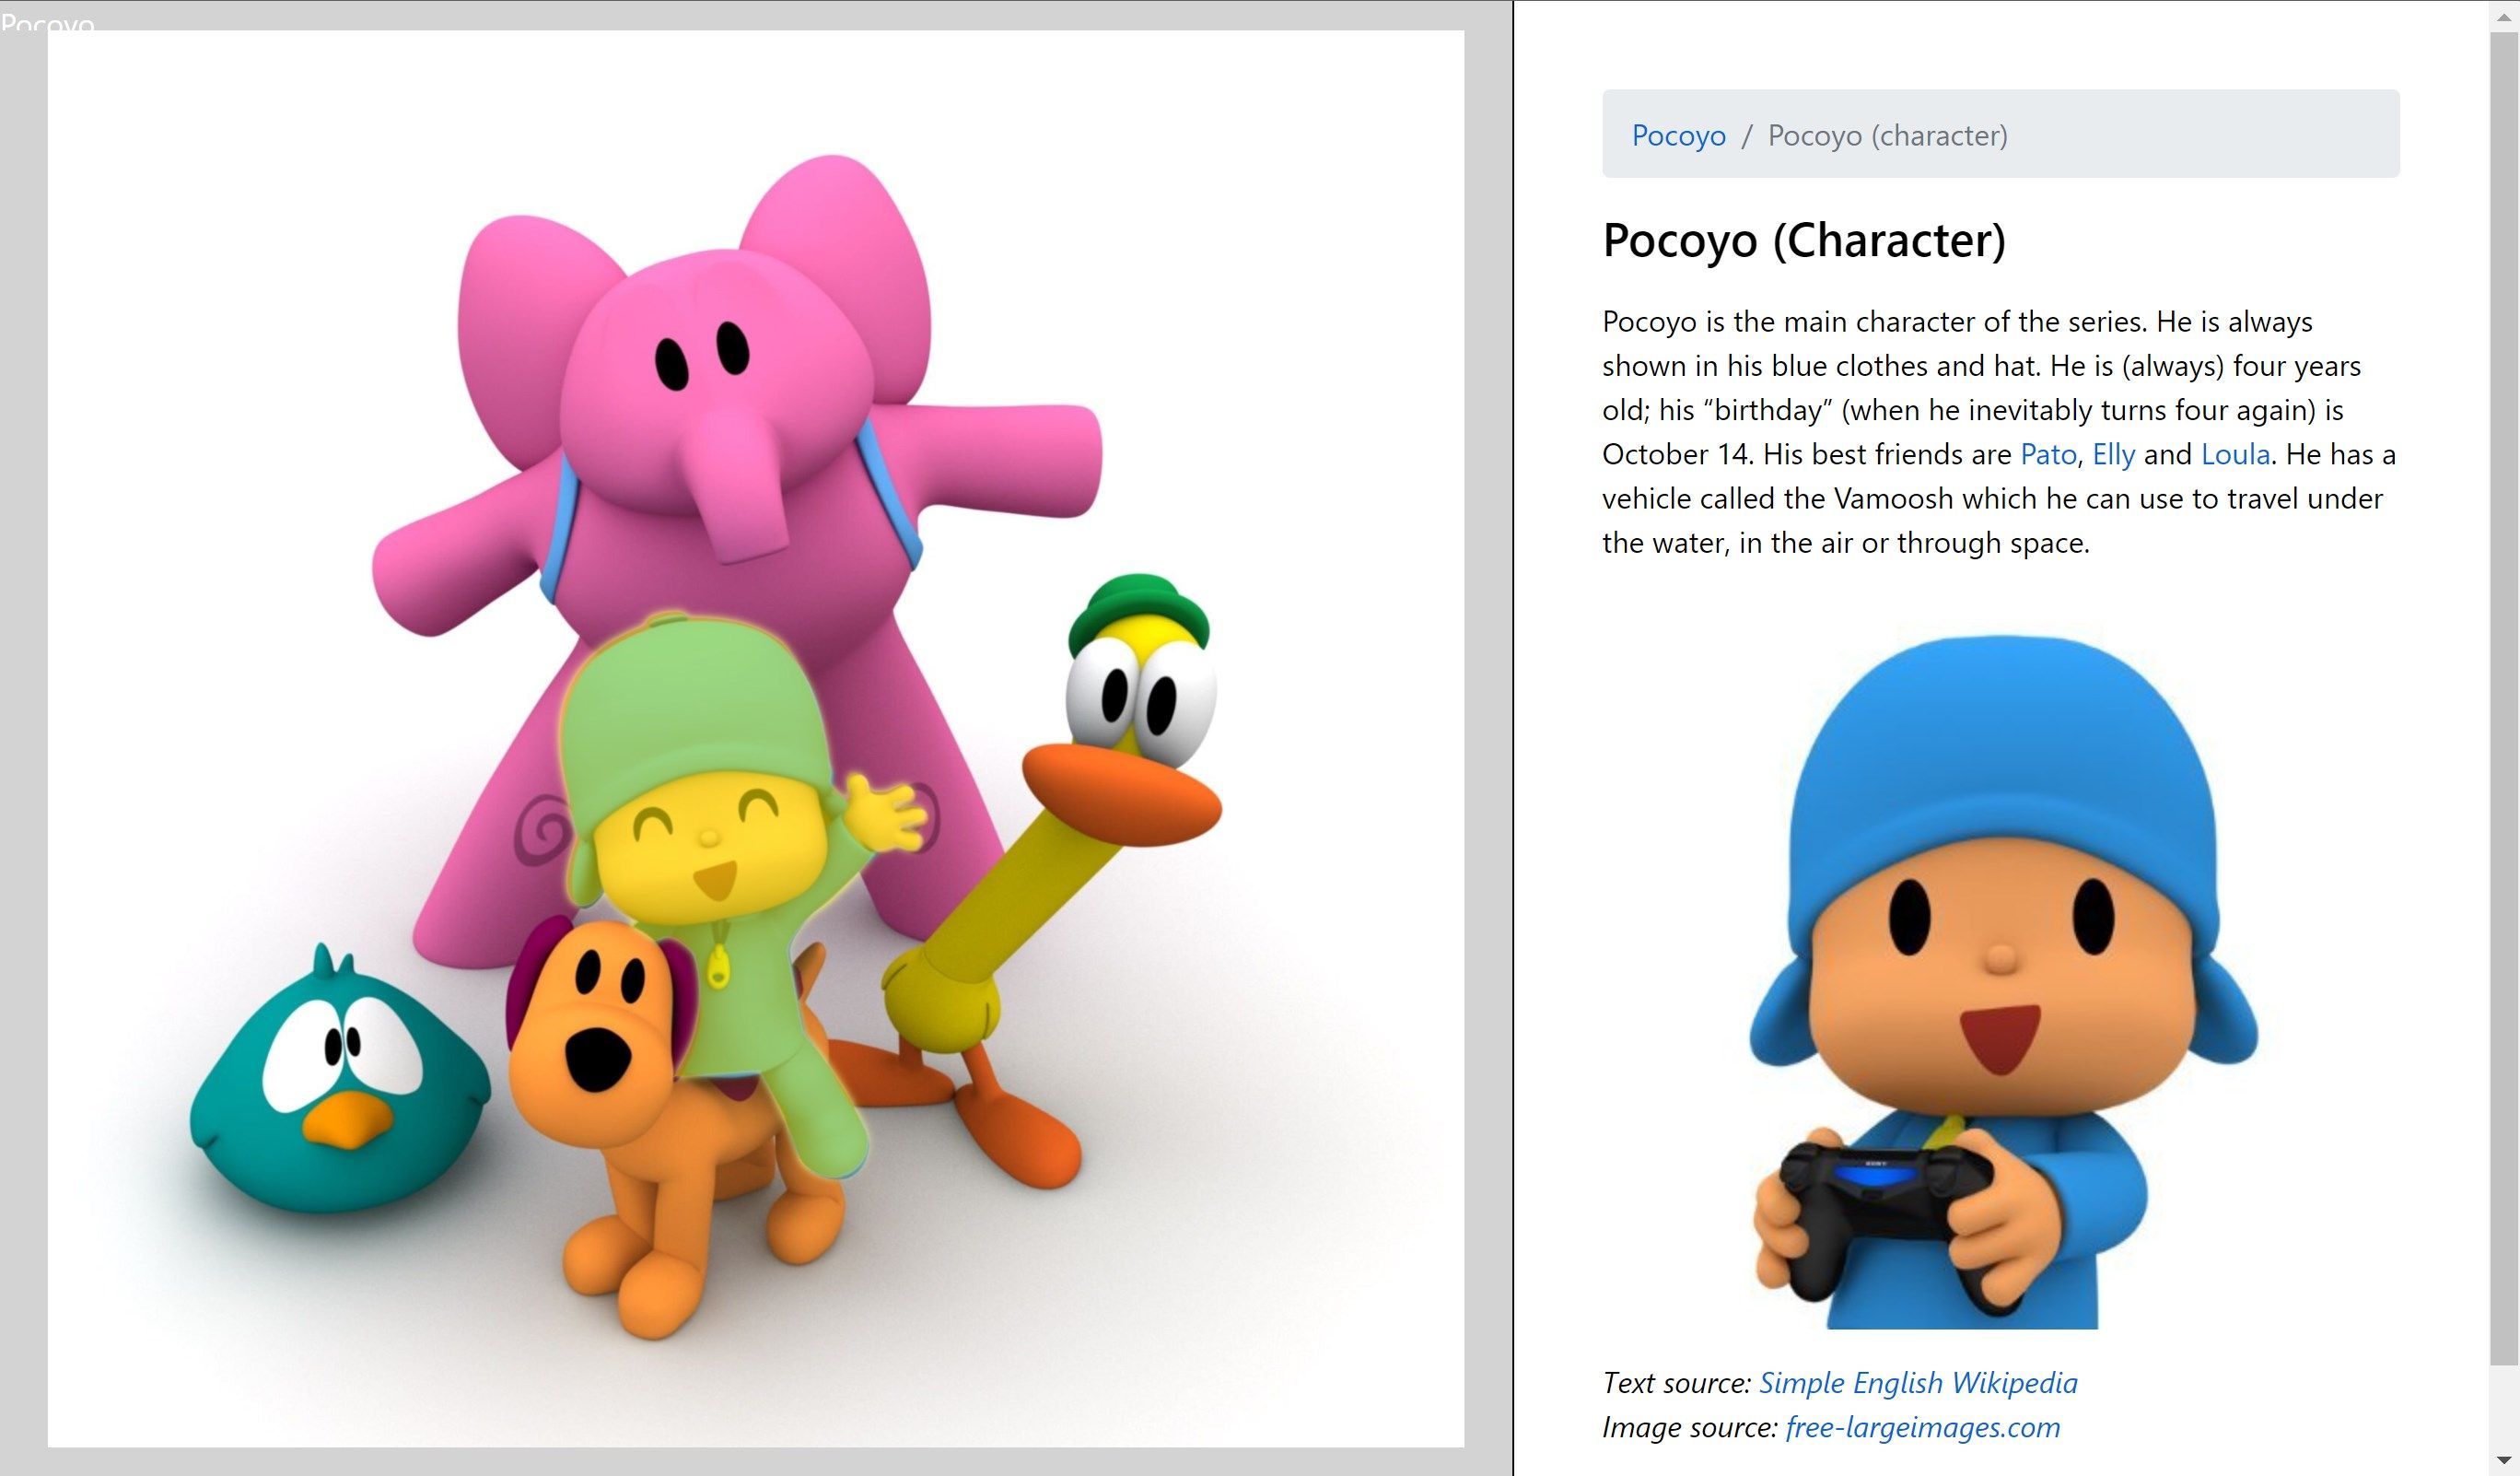 Published page (exdpic.com/peter/pocoyo)